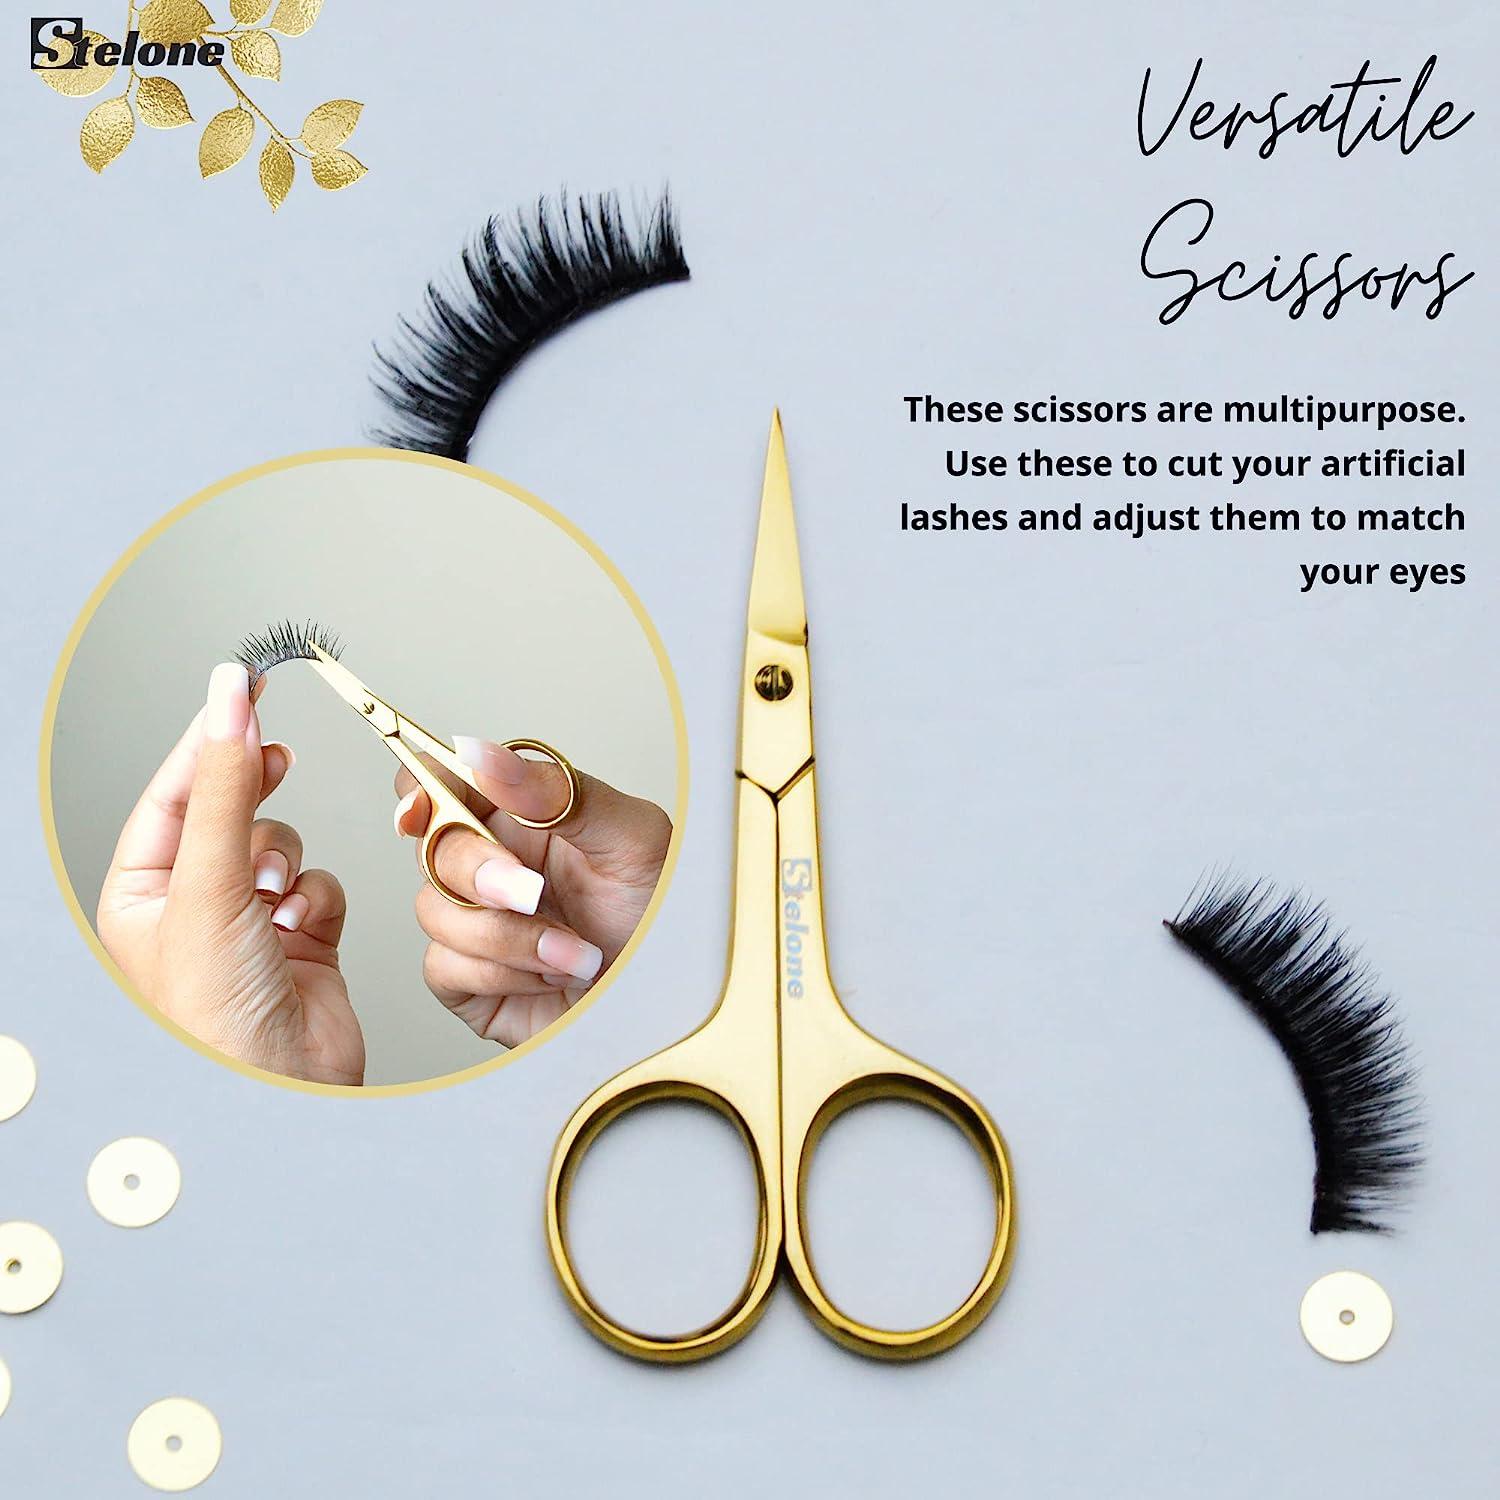 Stelone Professional Grooming Scissors - Eyebrow Scissors - Small Curved  Stainless Steel Manicure & Beauty Scissor for Women (Gold)